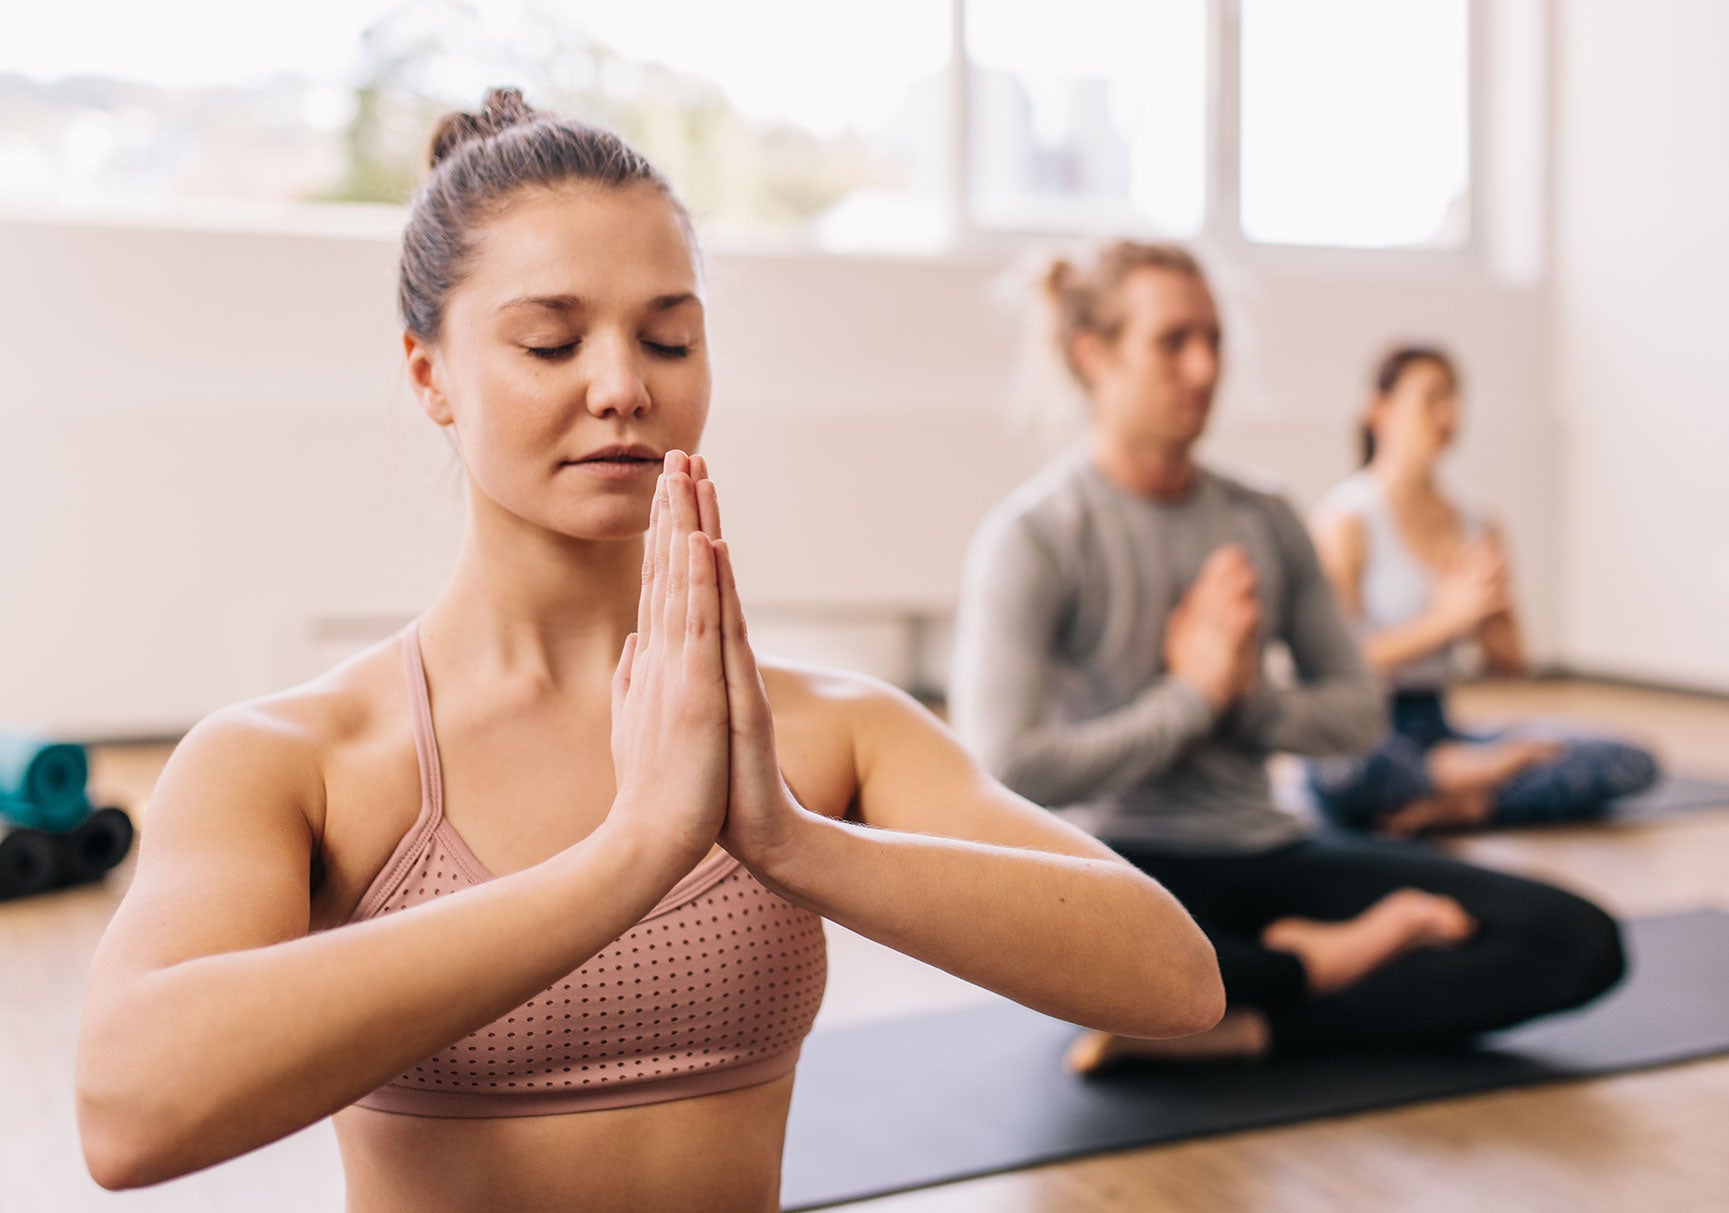 Young woman practicing yoga in gym class in fitness center with people in background. People meditating at health club.